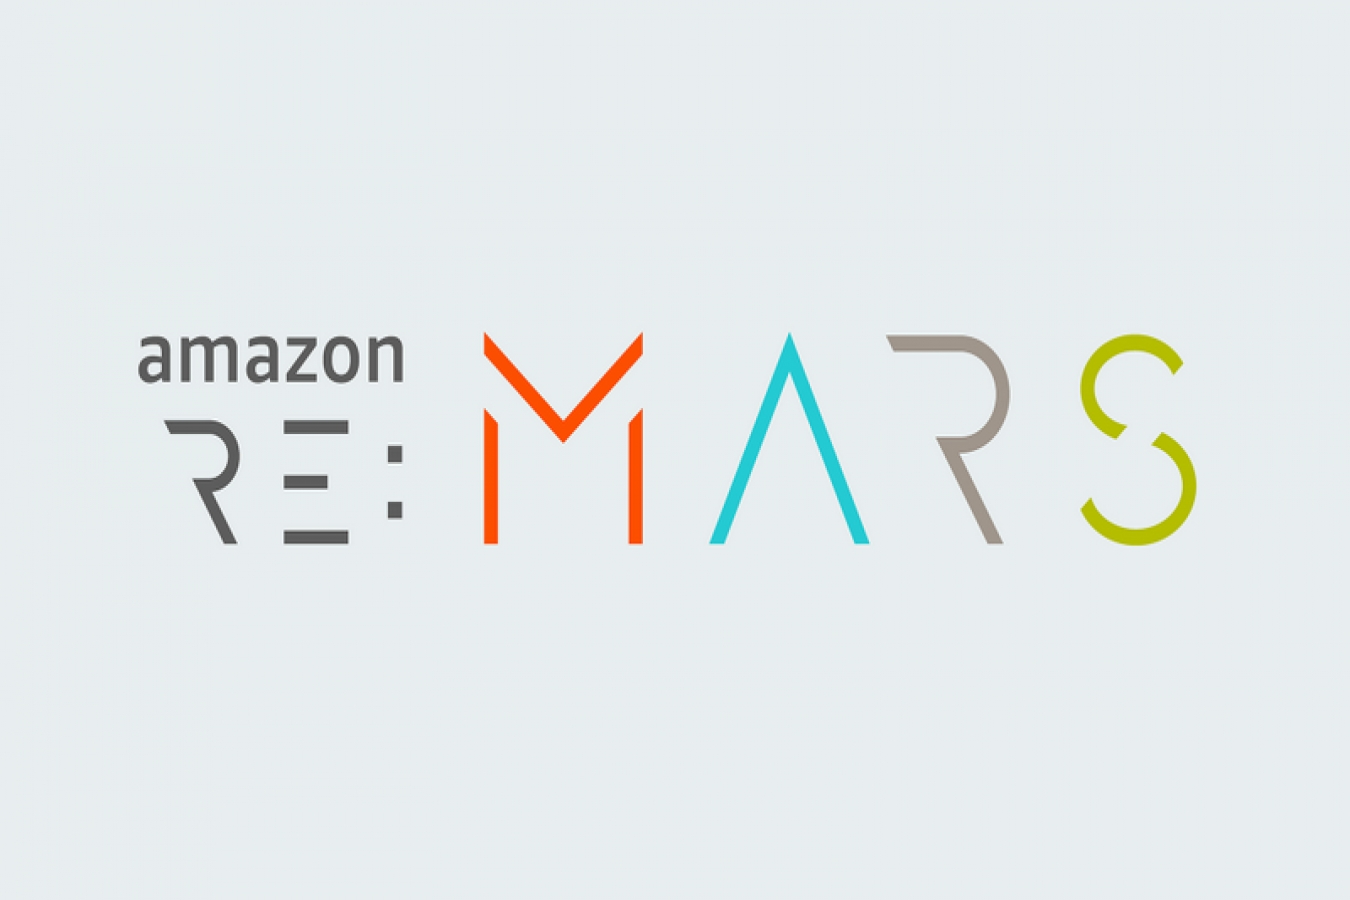 Amazon Announces reMARS Conference on Robotics, Space, and AI